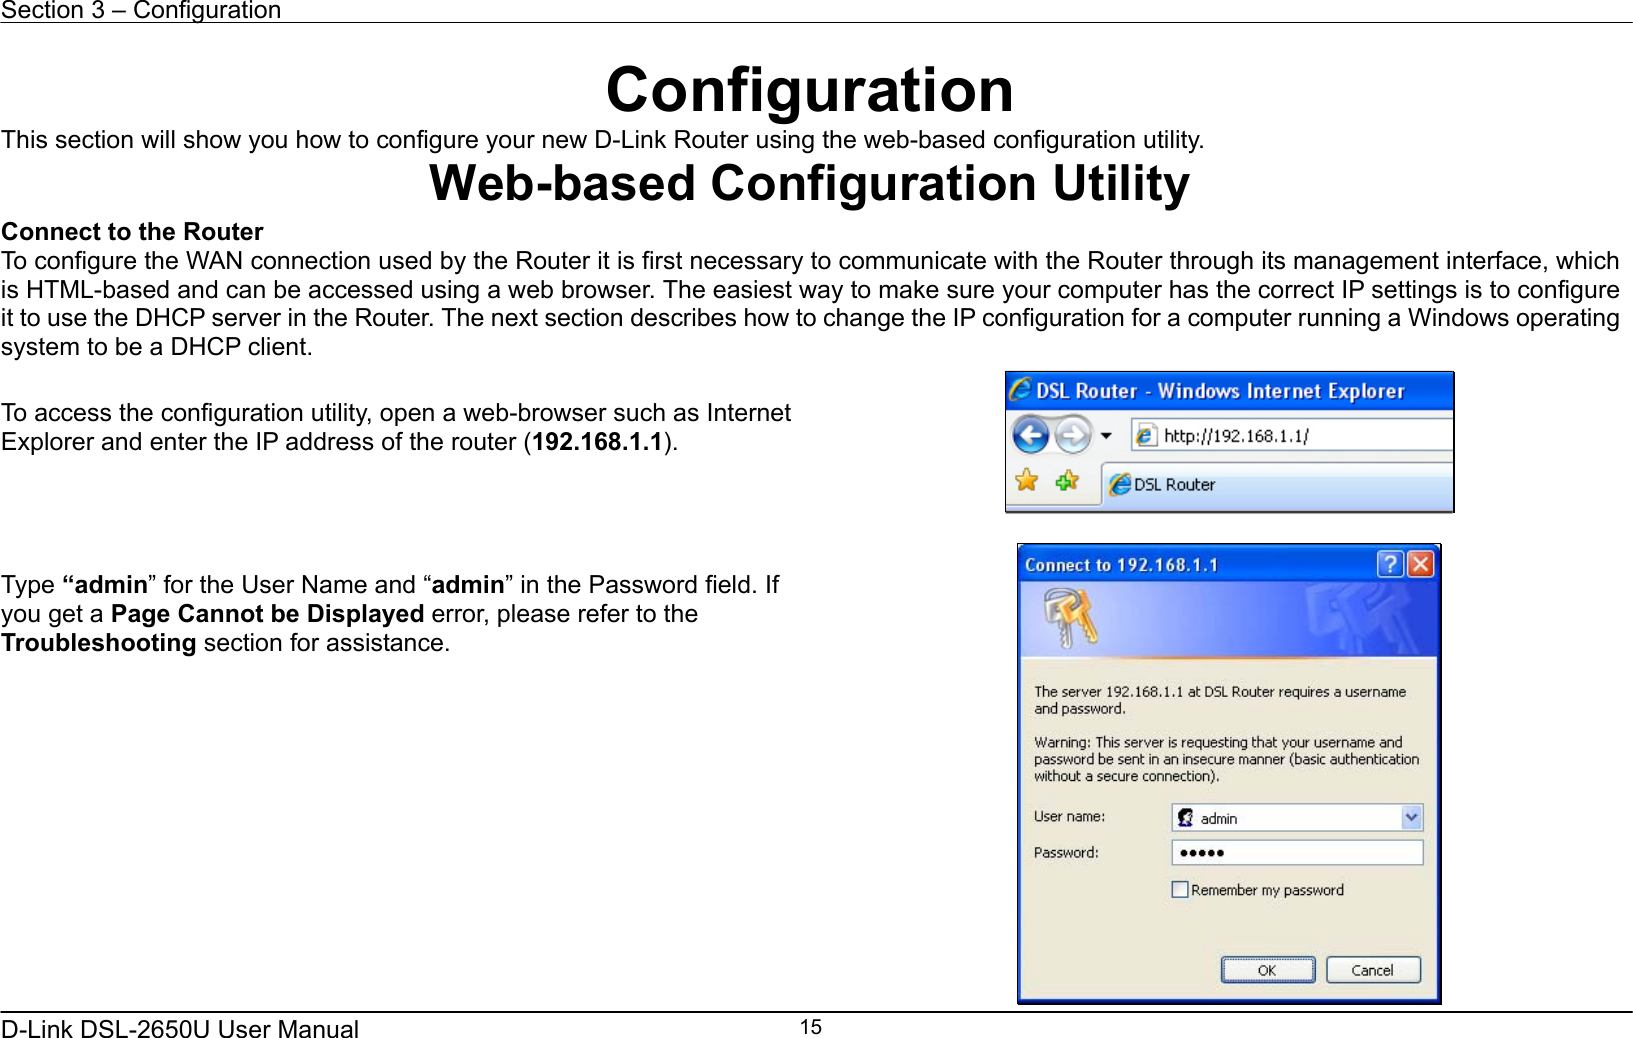 Section 3 – Configuration   D-Link DSL-2650U User Manual    15Configuration This section will show you how to configure your new D-Link Router using the web-based configuration utility. Web-based Configuration Utility Connect to the Router   To configure the WAN connection used by the Router it is first necessary to communicate with the Router through its management interface, which is HTML-based and can be accessed using a web browser. The easiest way to make sure your computer has the correct IP settings is to configure it to use the DHCP server in the Router. The next section describes how to change the IP configuration for a computer running a Windows operating system to be a DHCP client.  To access the configuration utility, open a web-browser such as Internet Explorer and enter the IP address of the router (192.168.1.1).      Type “admin” for the User Name and “admin” in the Password field. If you get a Page Cannot be Displayed error, please refer to the Troubleshooting section for assistance.  